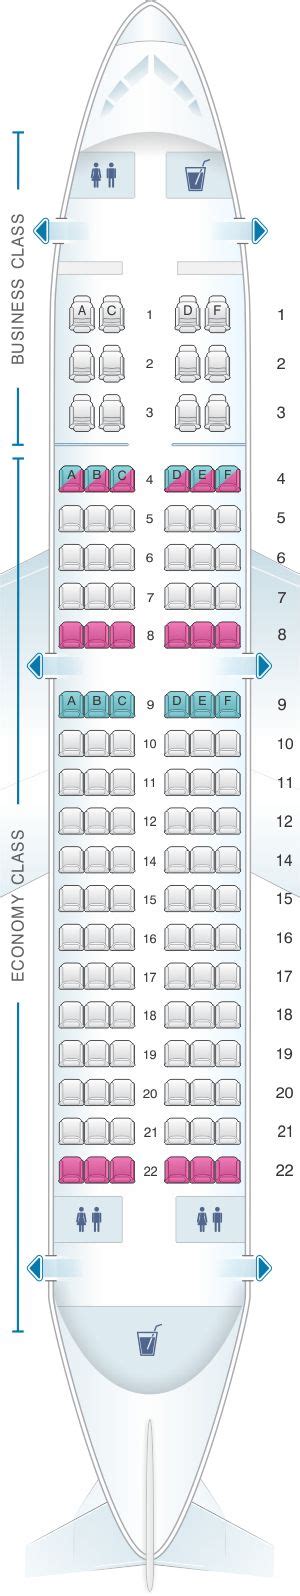 Seat Map Avianca Airbus A319 Azerbaijan Airlines Kingfisher Airlines